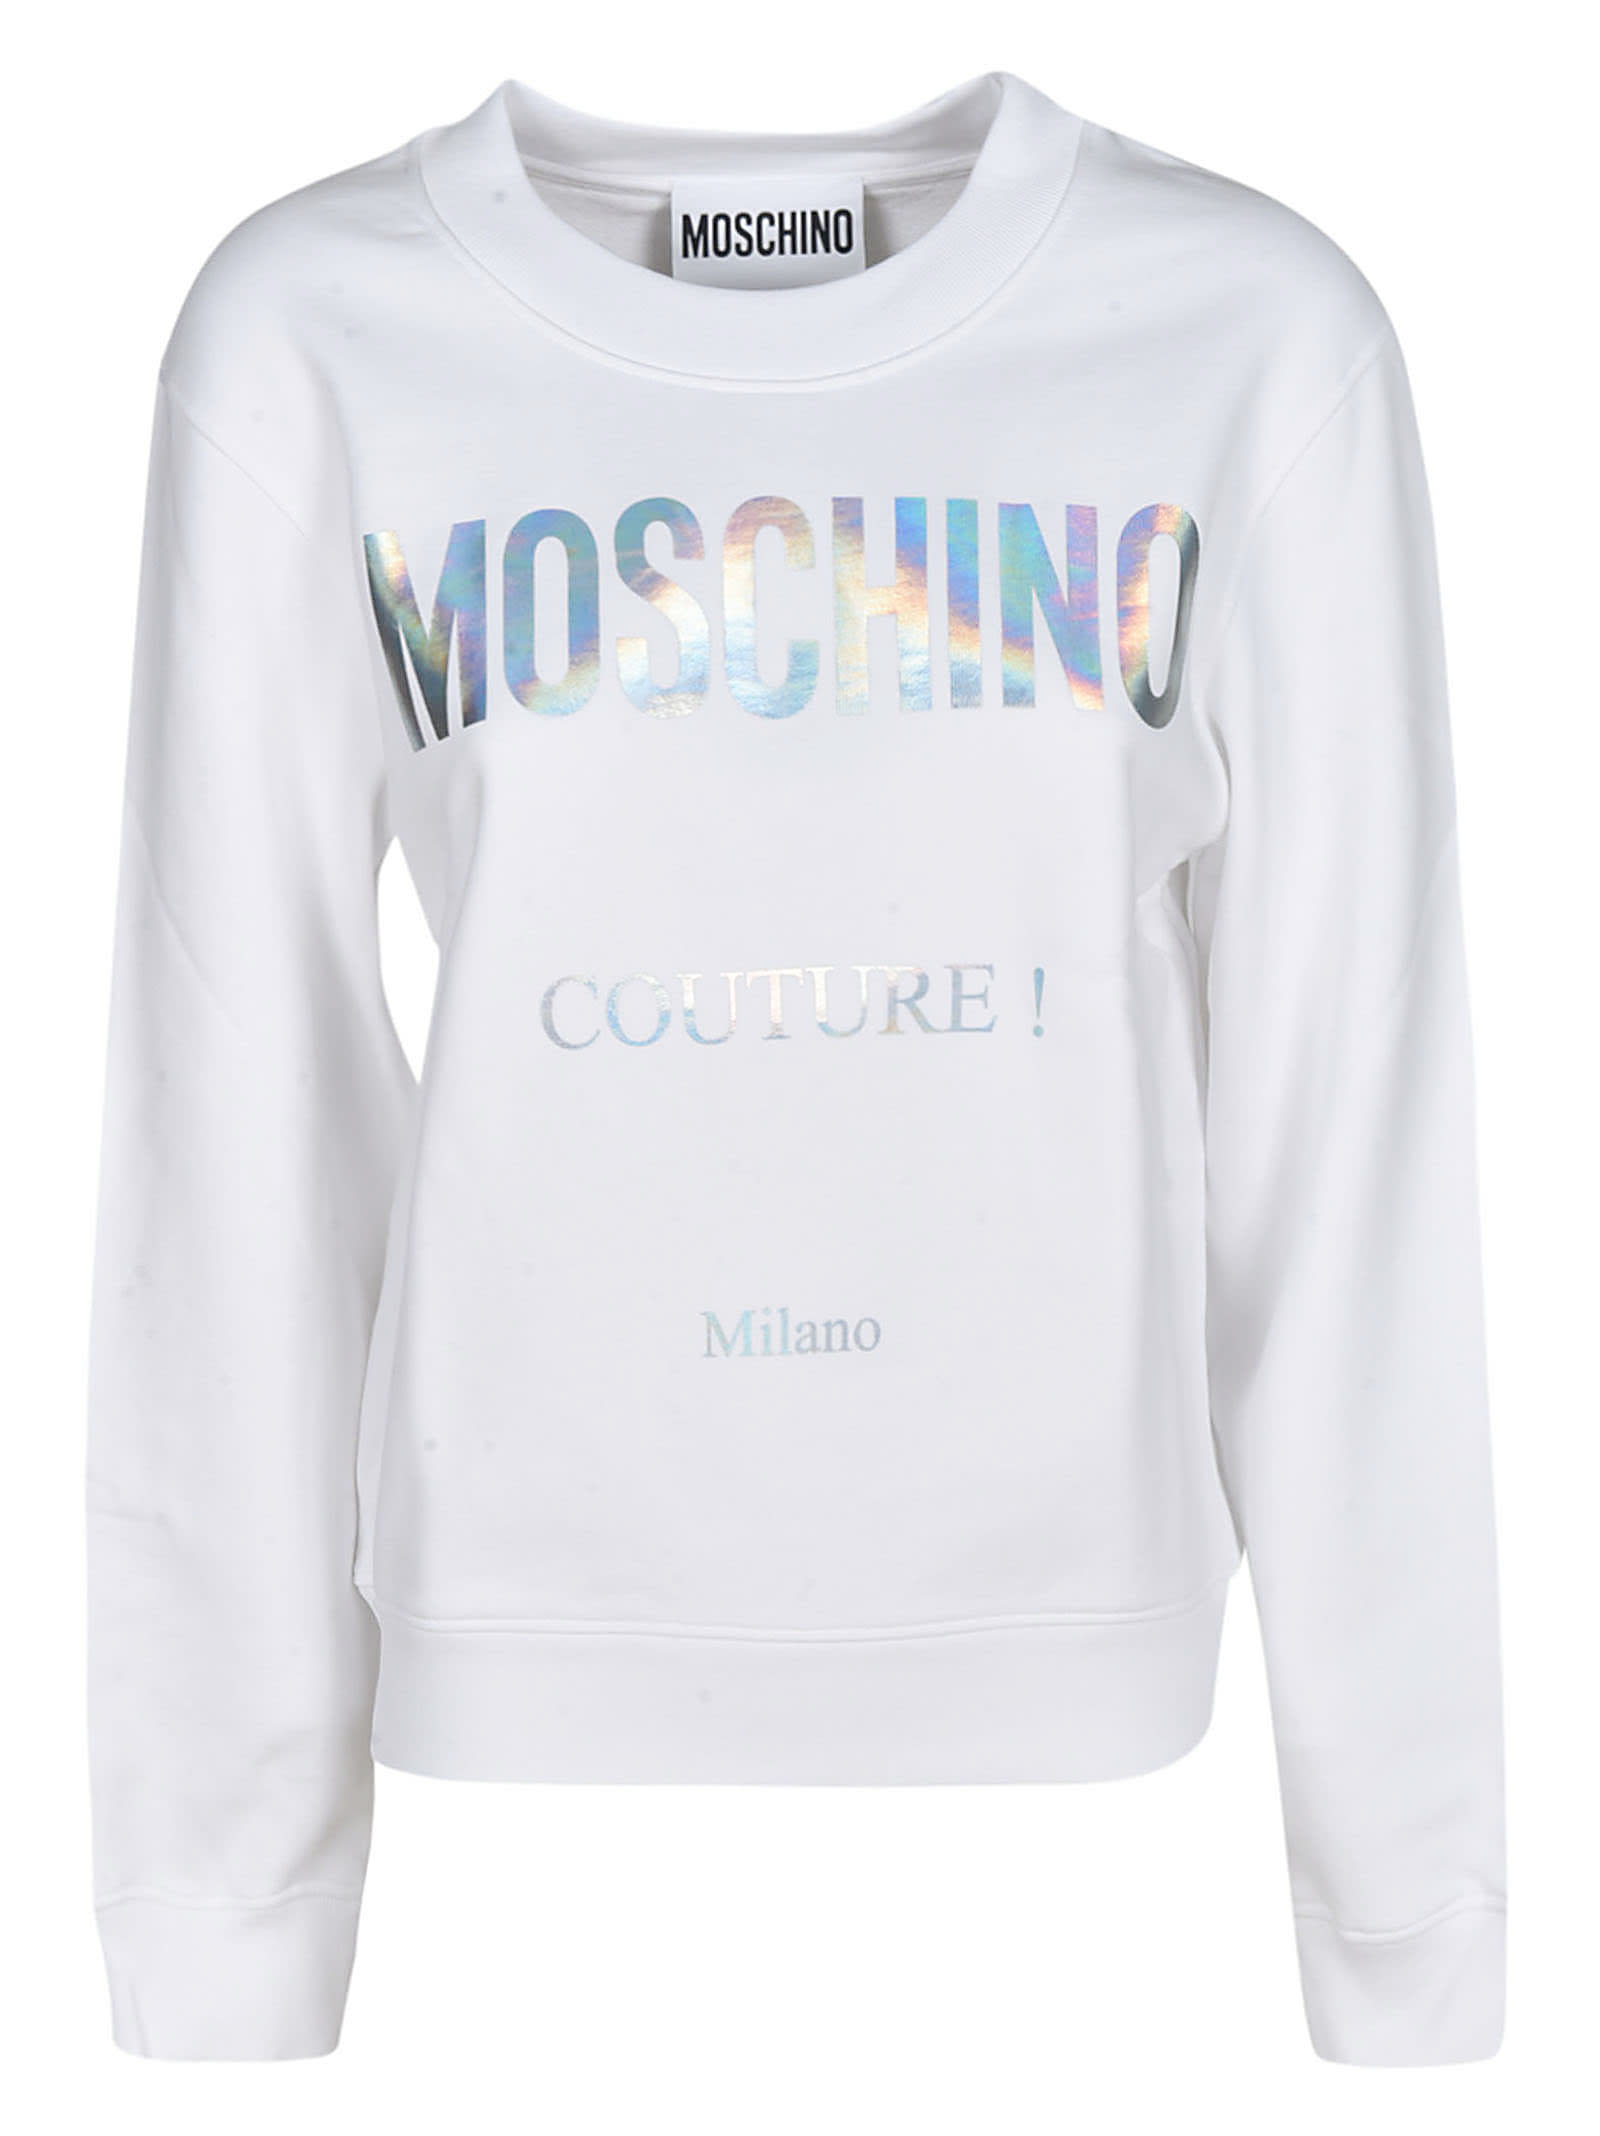 MOSCHINO COUTURE jumper,J1704 5527 1001